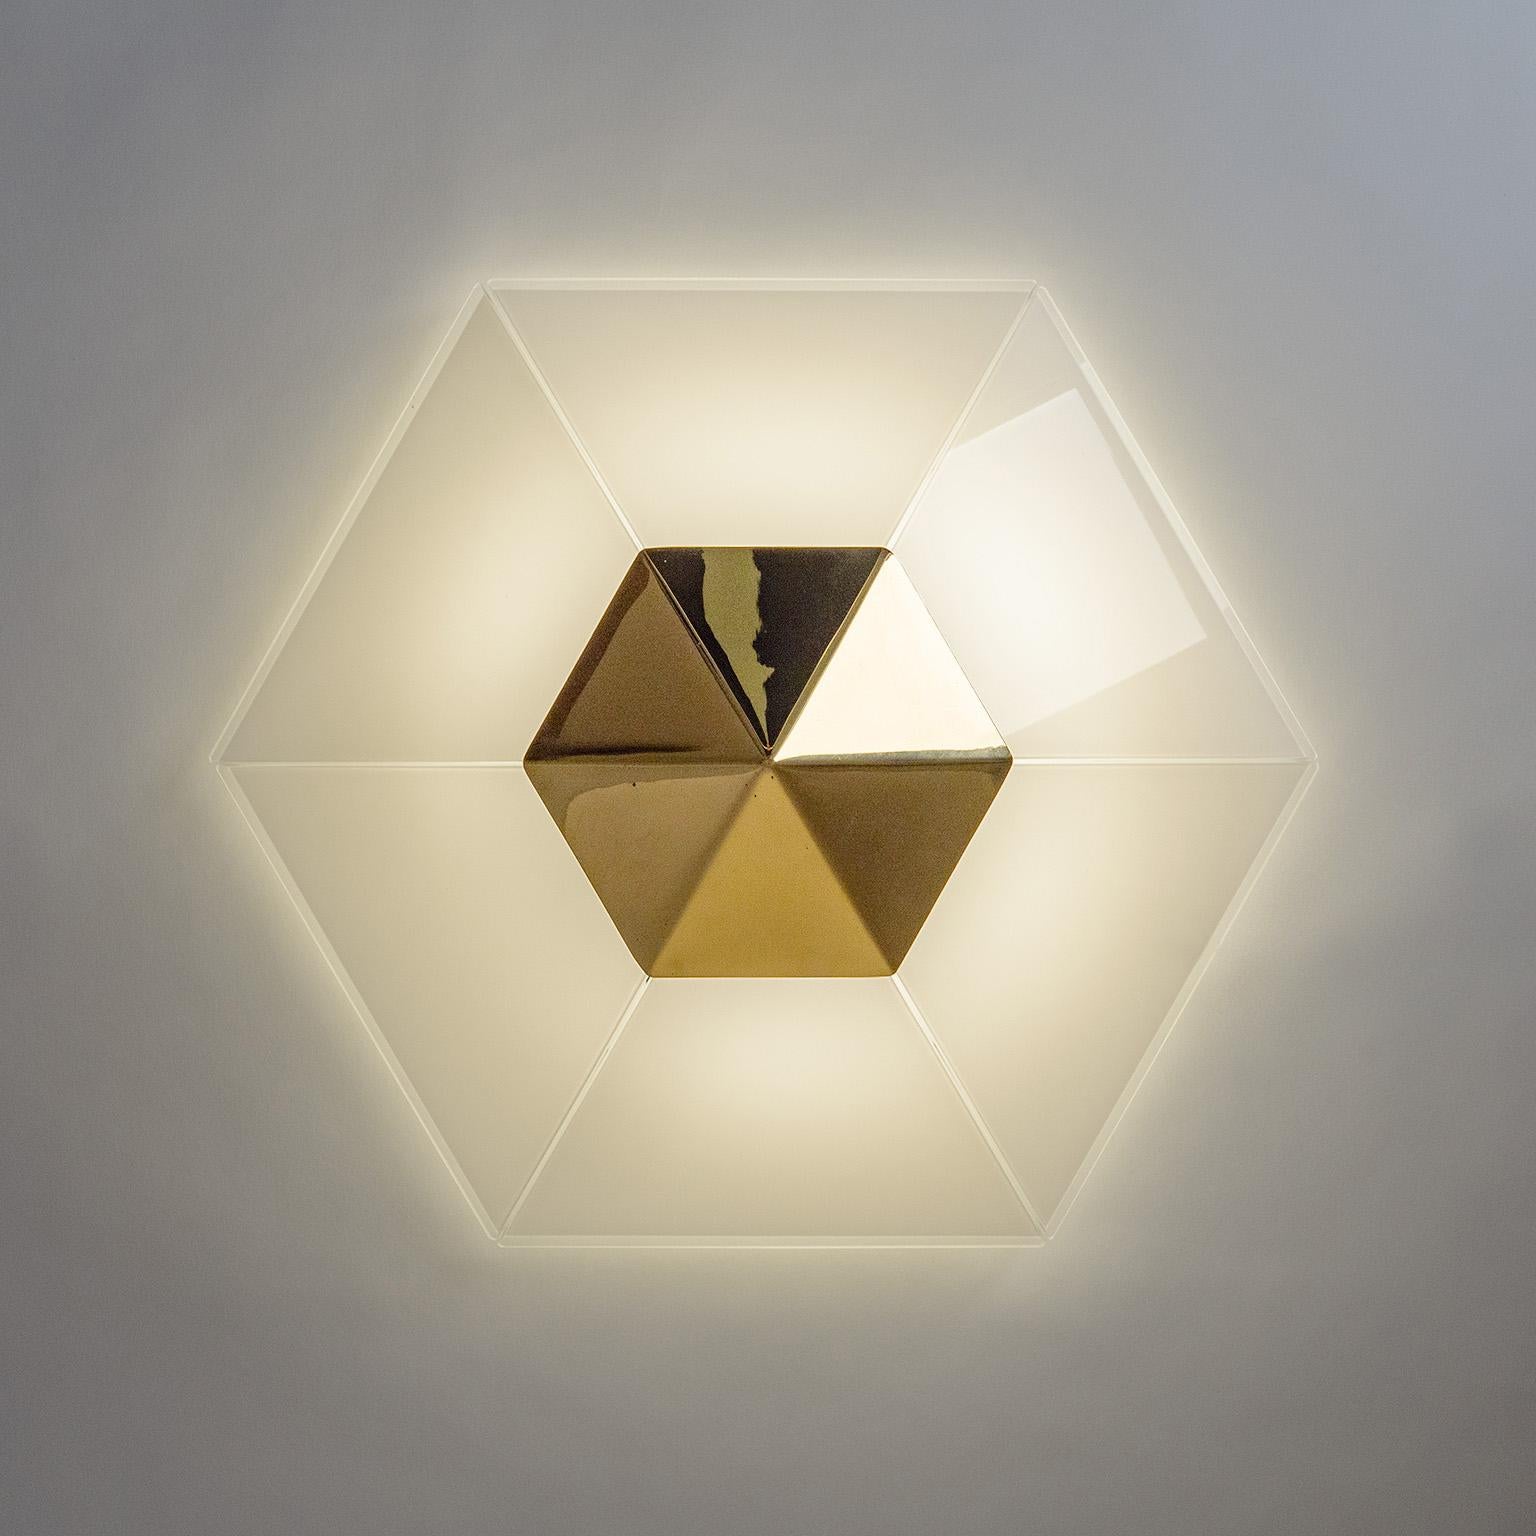 Fine hexagonal ceiling light by J.T. Kalmar from the 1980s. Inverted six-sided pyramid with glass sides and a large polished brass top. The glass panes have a white casing and are facetted on the top edge to reveal the clear glass underneath. Six